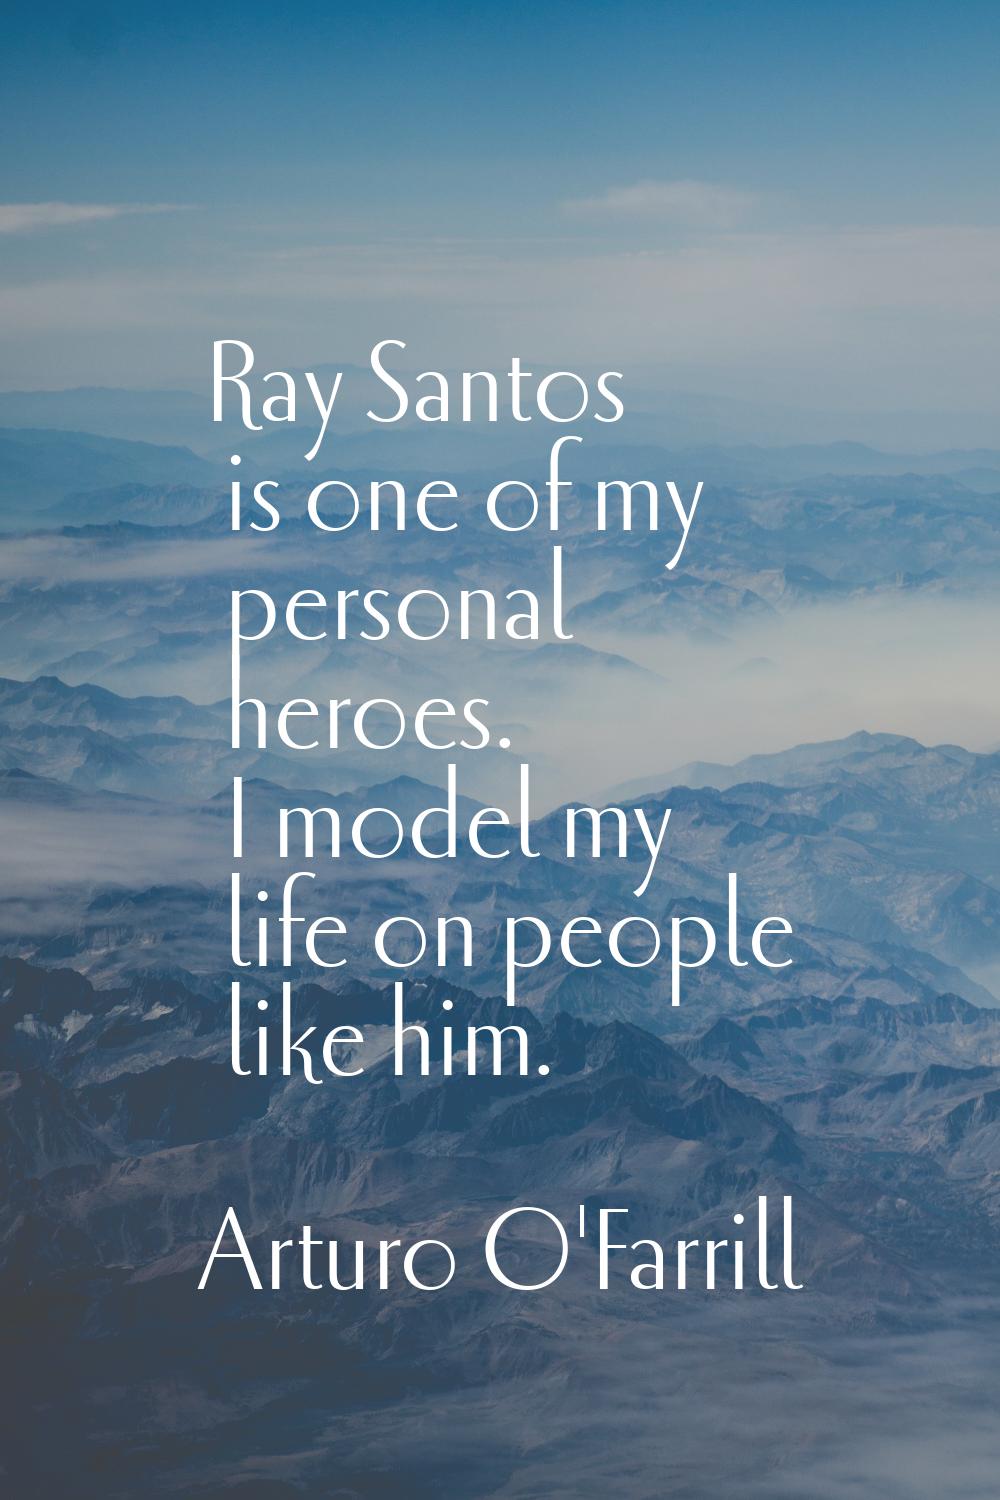 Ray Santos is one of my personal heroes. I model my life on people like him.